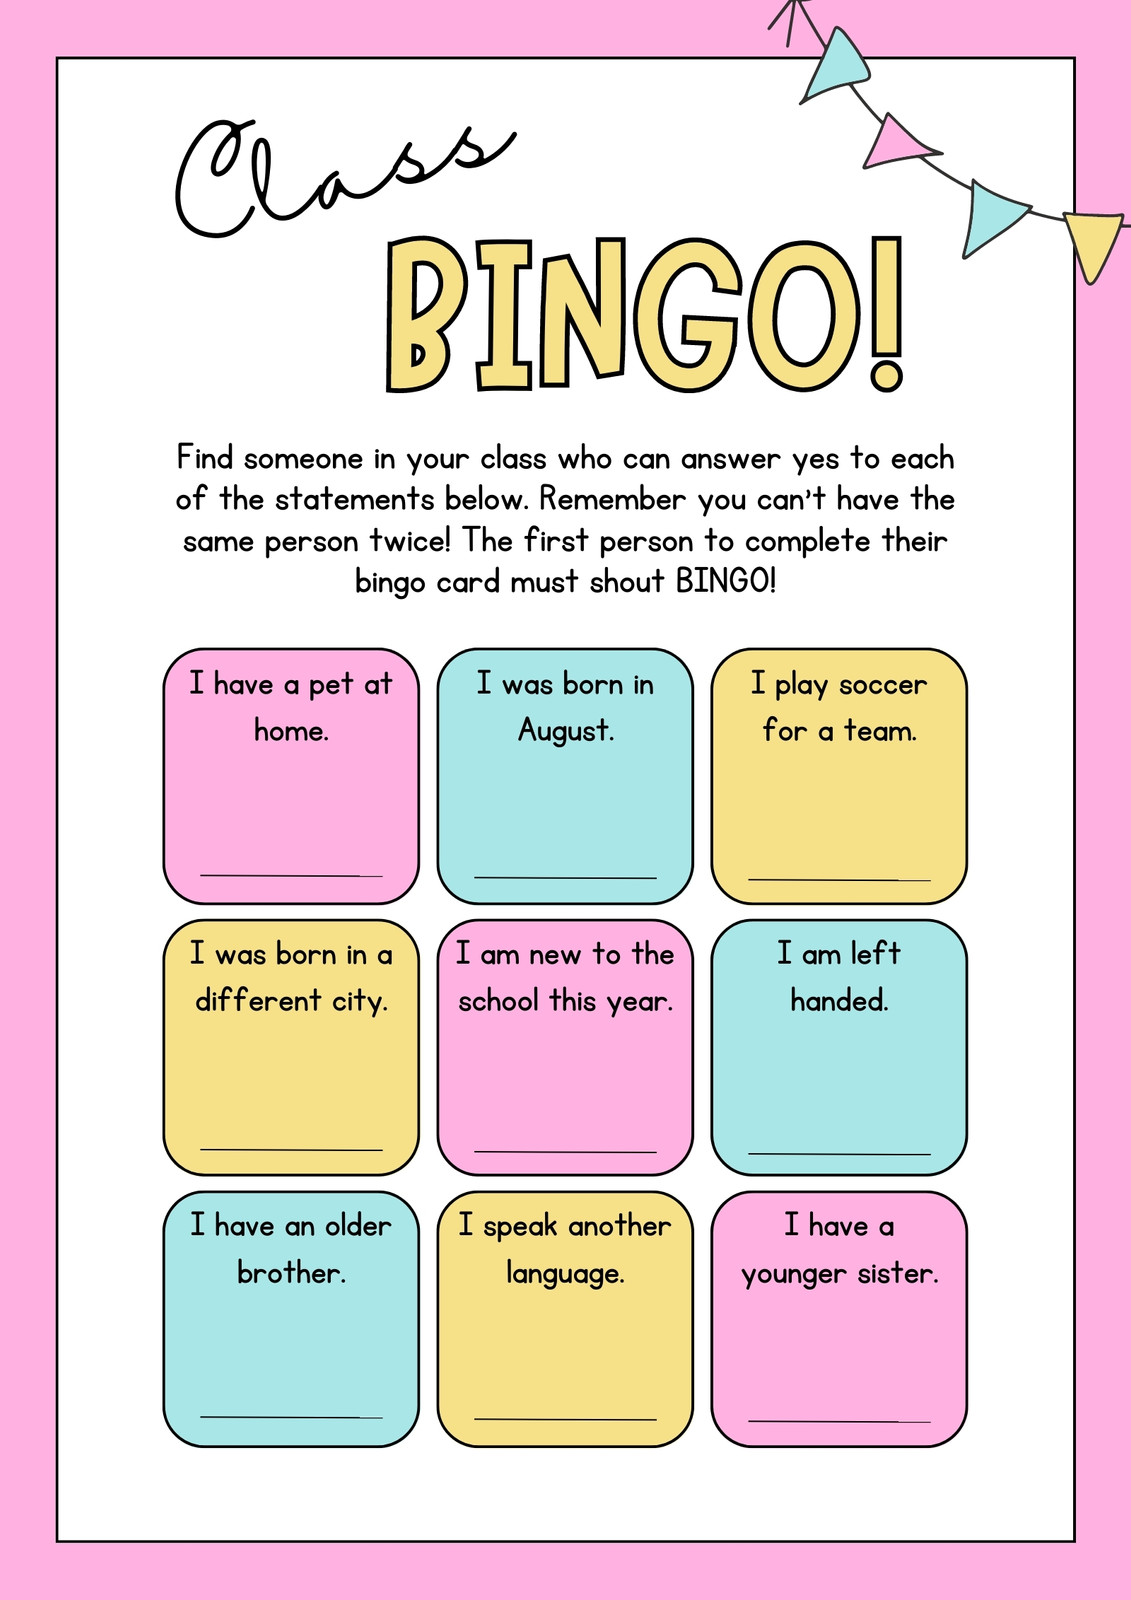 Playing a Bingo Game in Teams with Language Cards